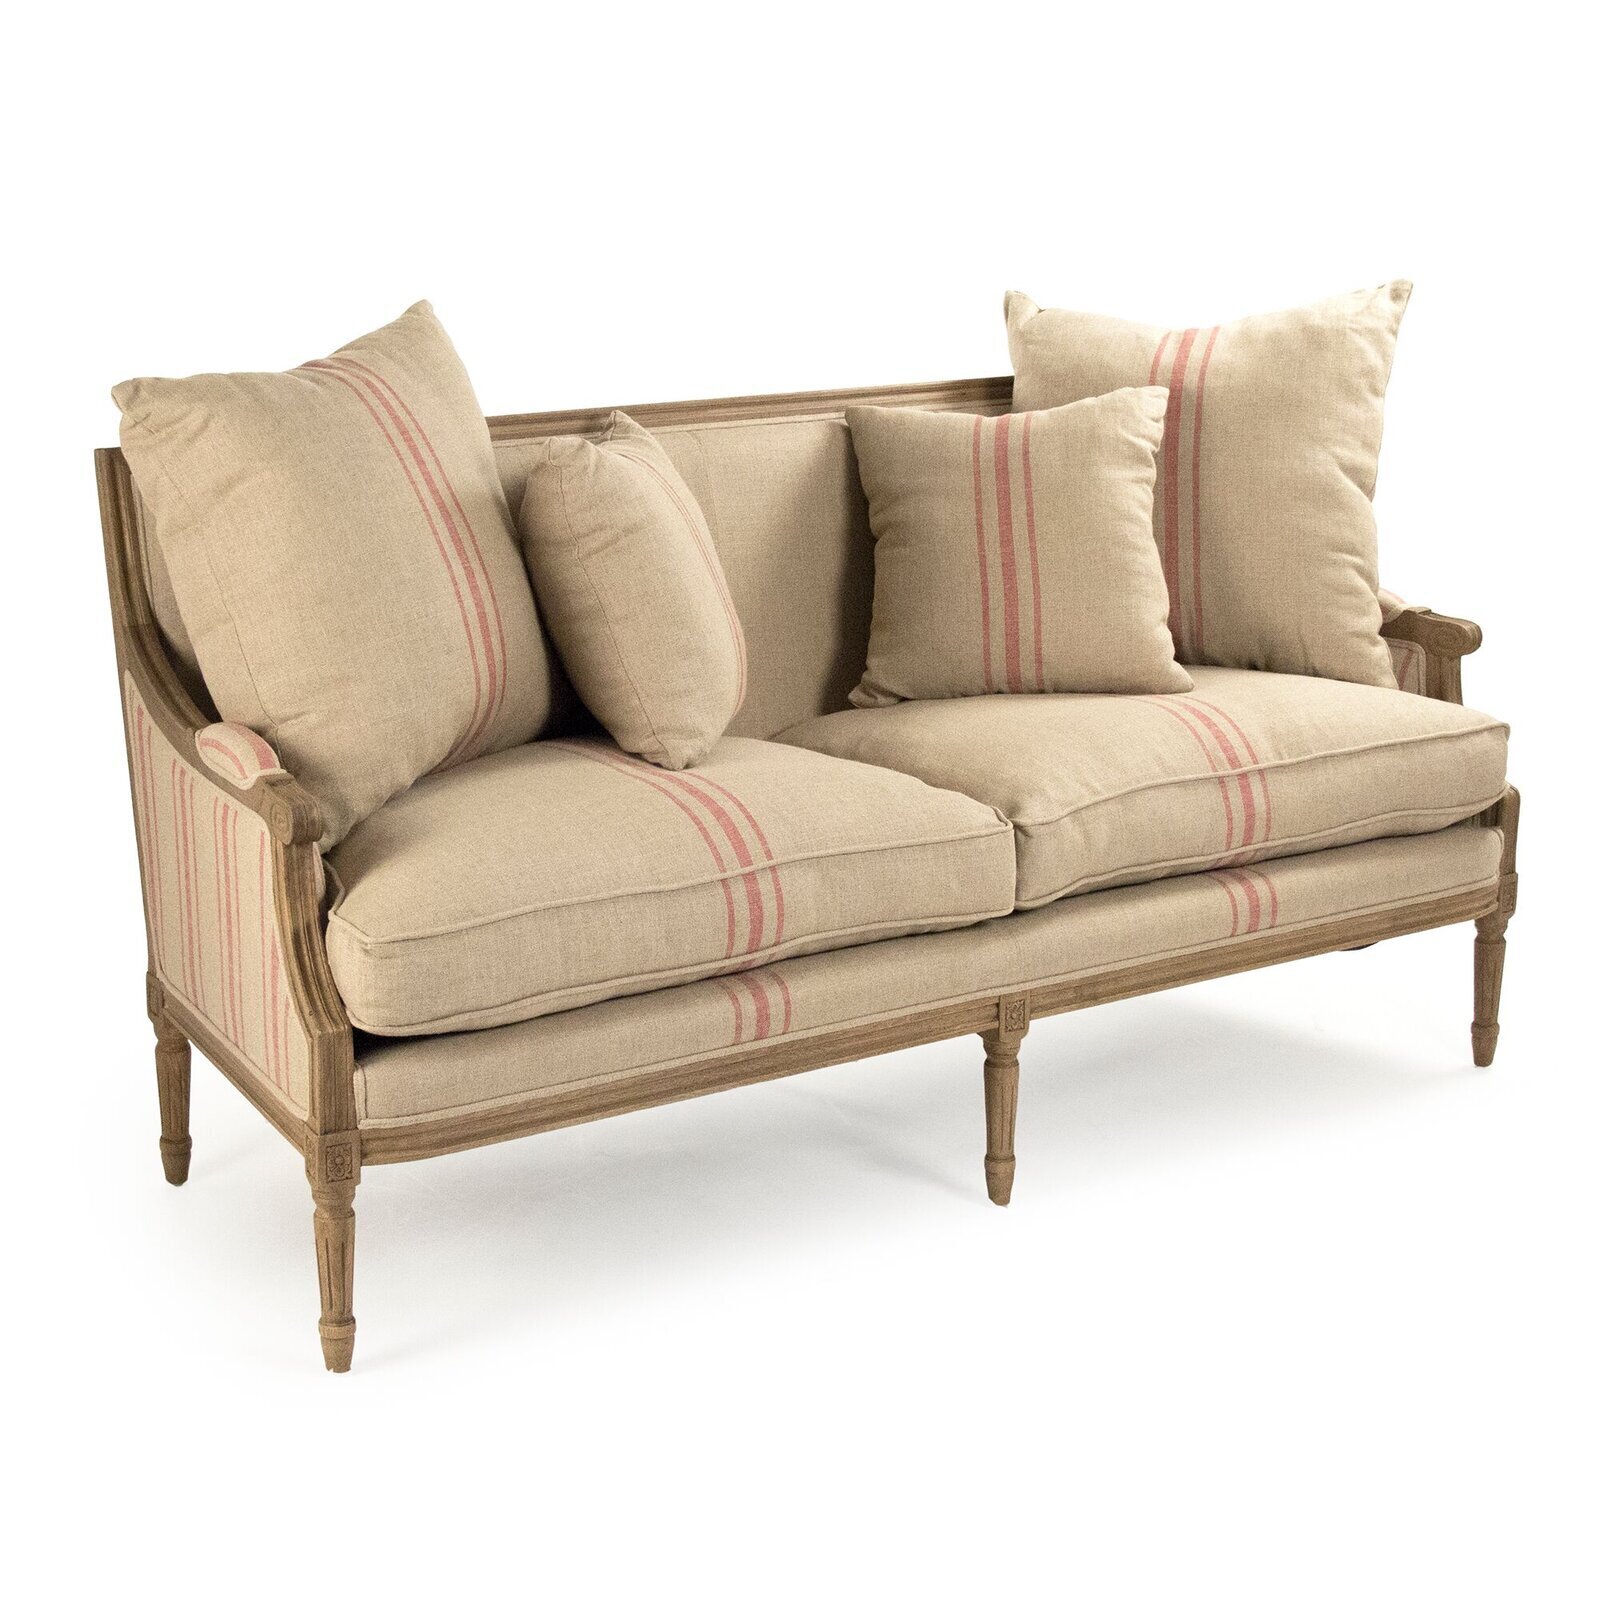 French Country Living Room Settee